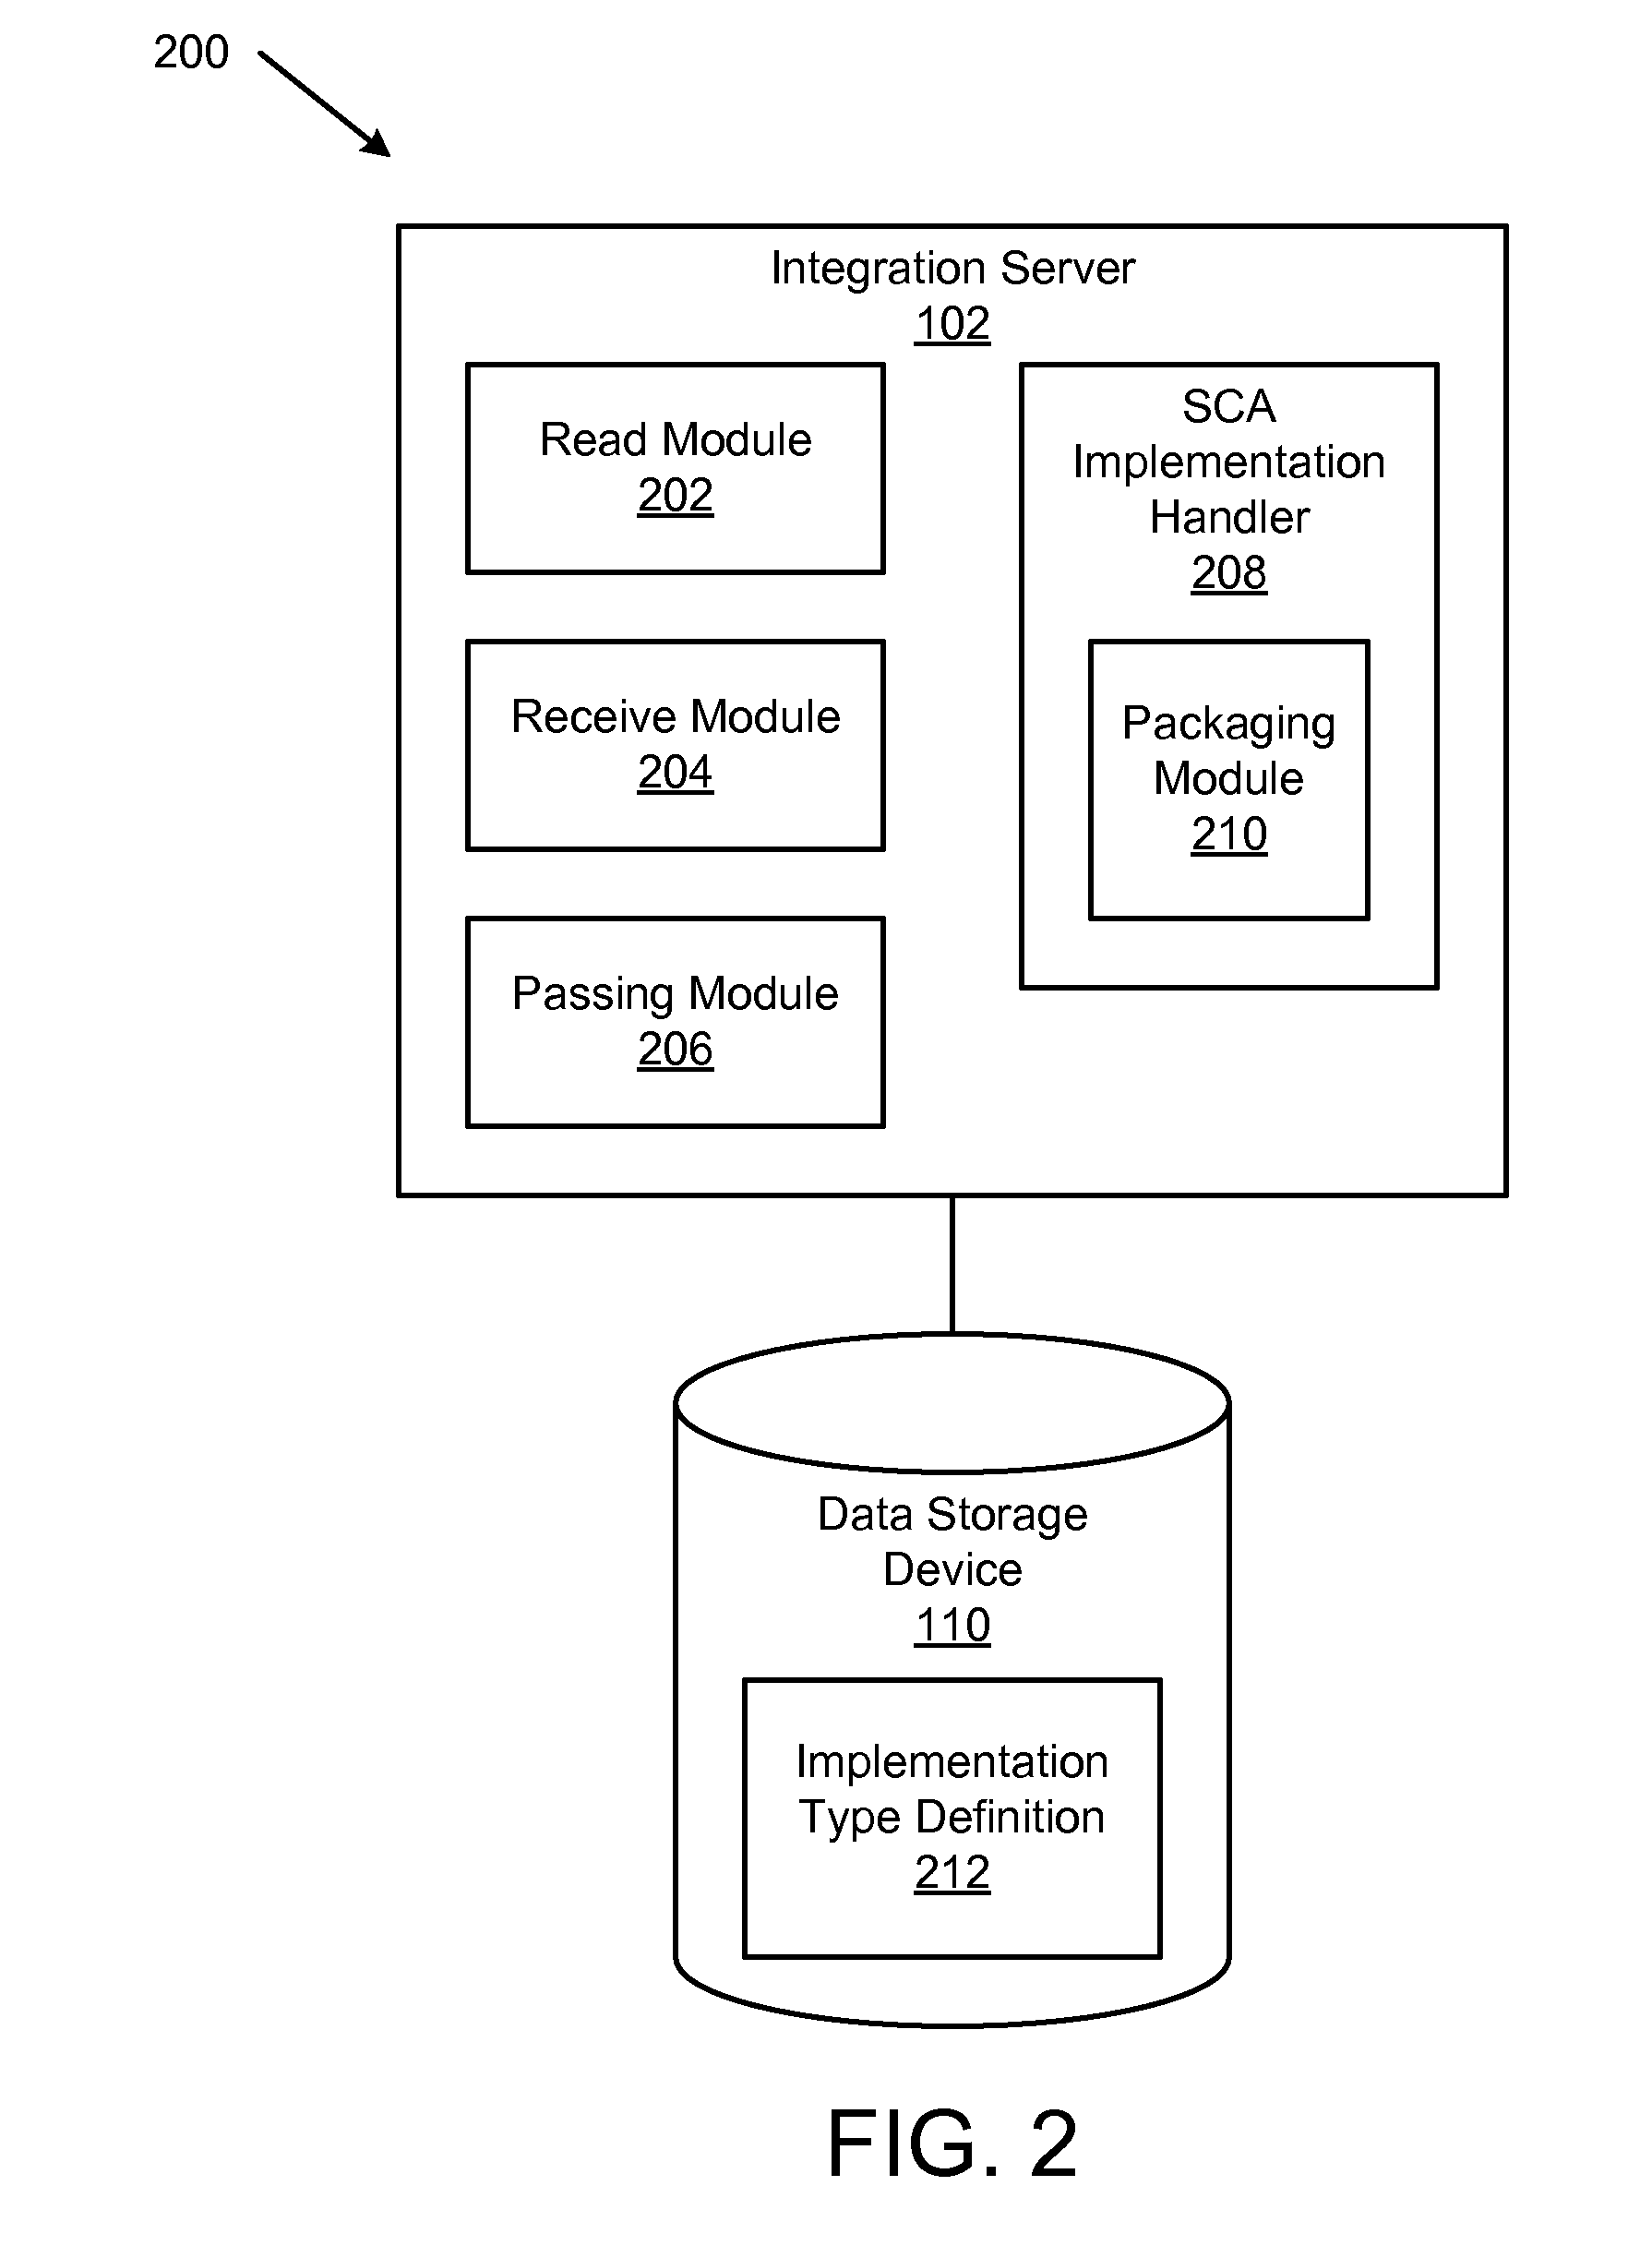 Apparatus, system, and method for supporting service components written in non-native runtime code in a service component architecture